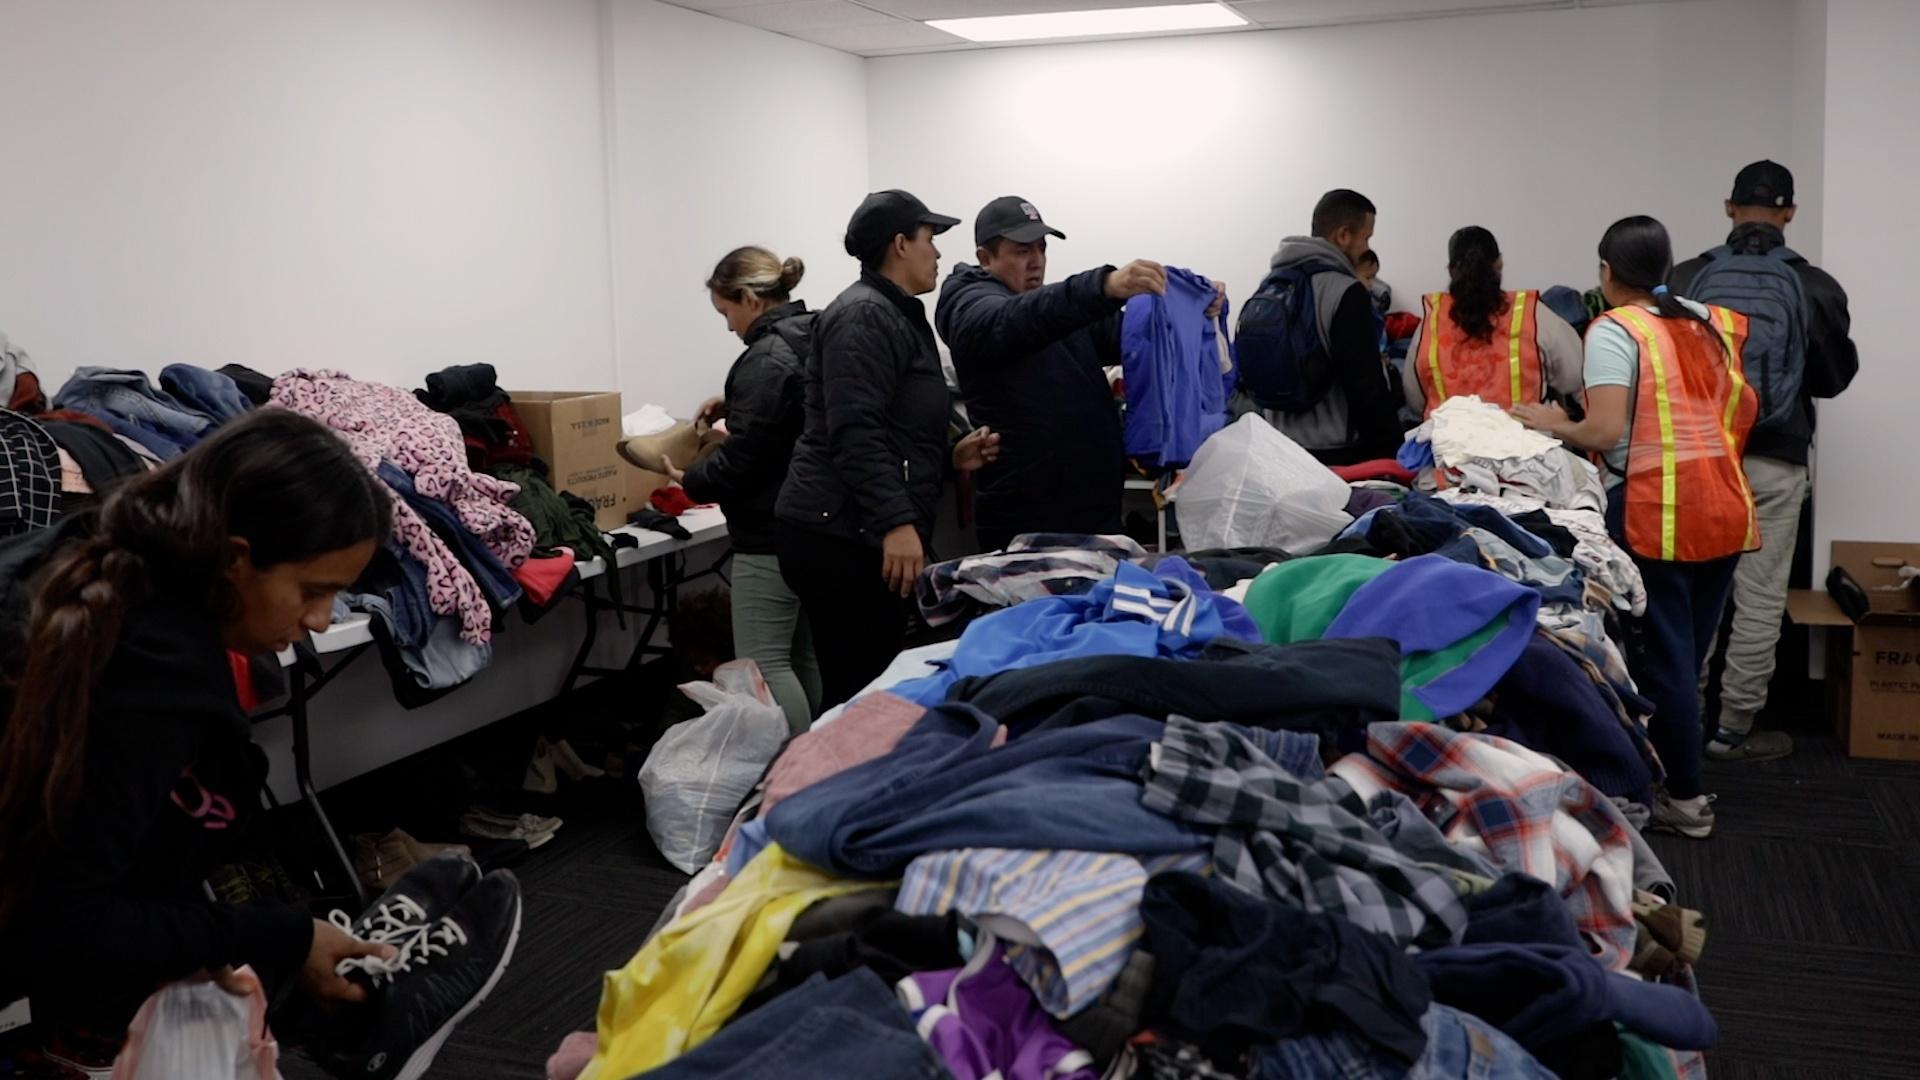 Clothing donations make lifesaving difference for migrants facing